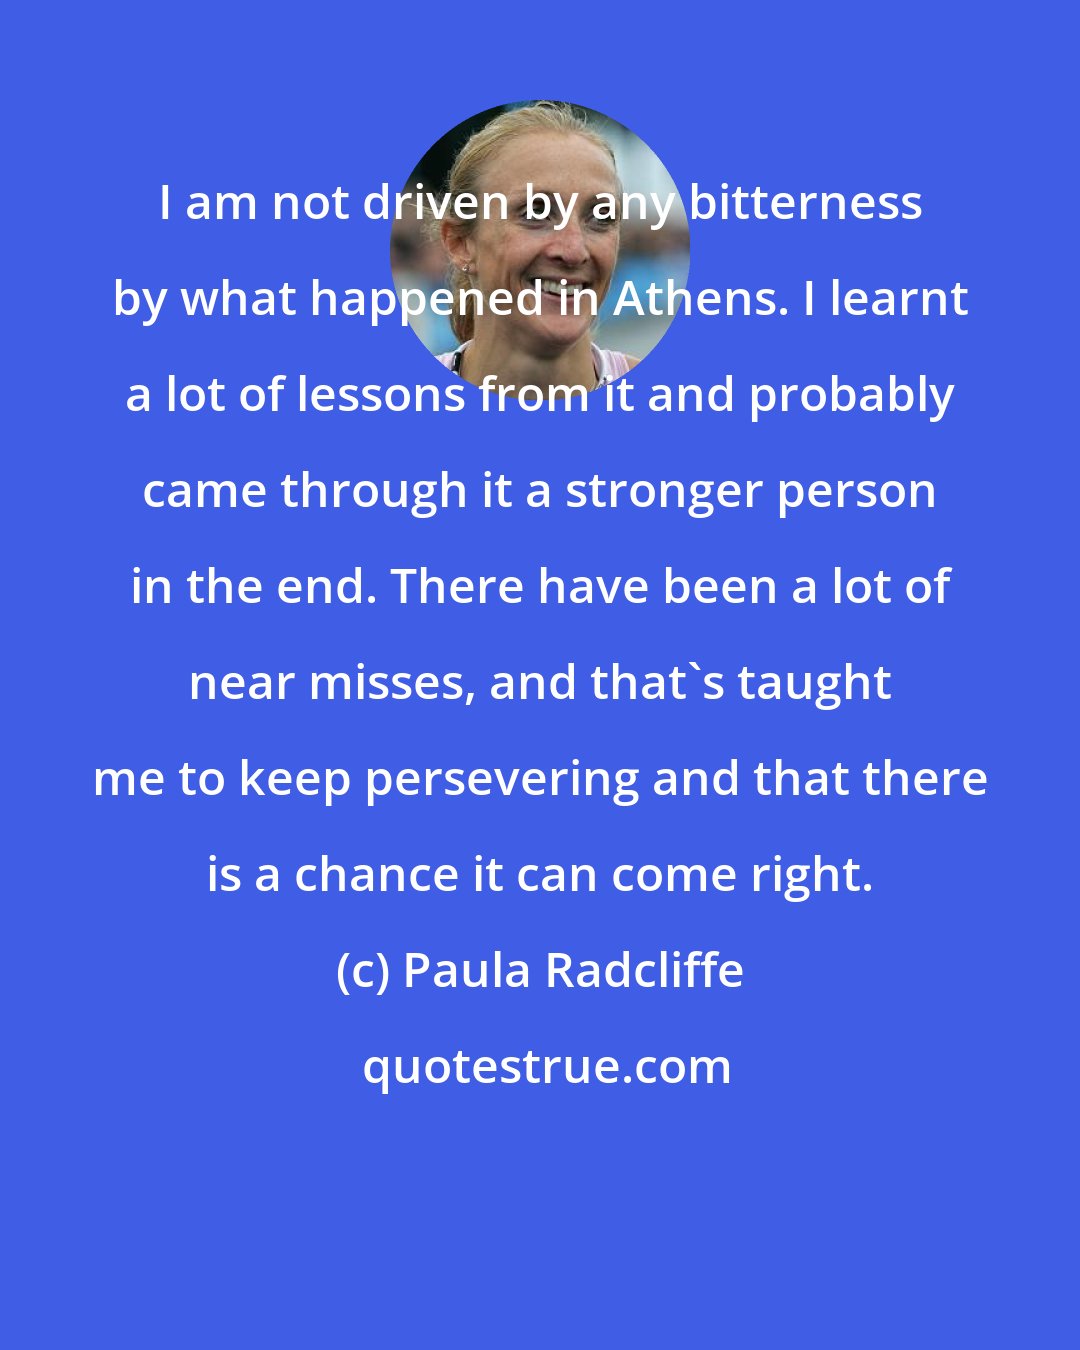 Paula Radcliffe: I am not driven by any bitterness by what happened in Athens. I learnt a lot of lessons from it and probably came through it a stronger person in the end. There have been a lot of near misses, and that's taught me to keep persevering and that there is a chance it can come right.